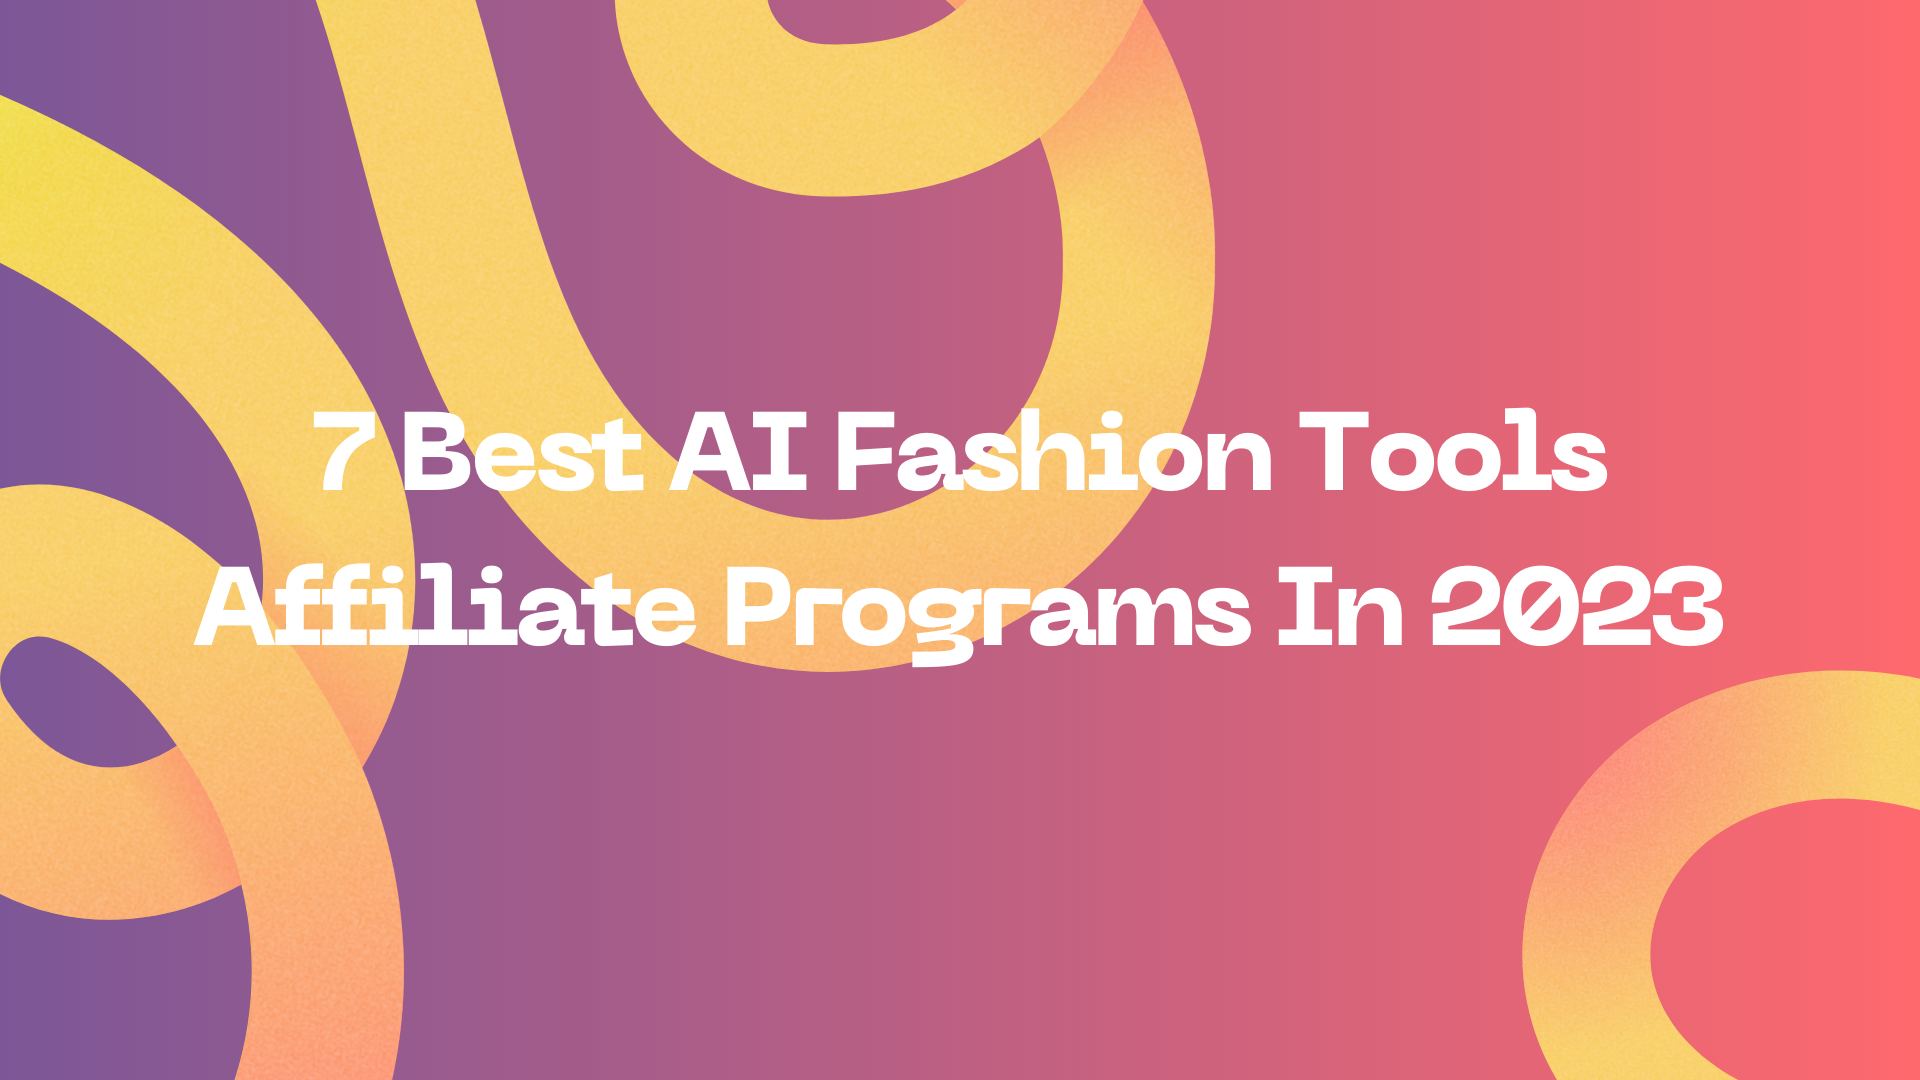 7 Best AI Fashion Tools Affiliate Programs In 2023